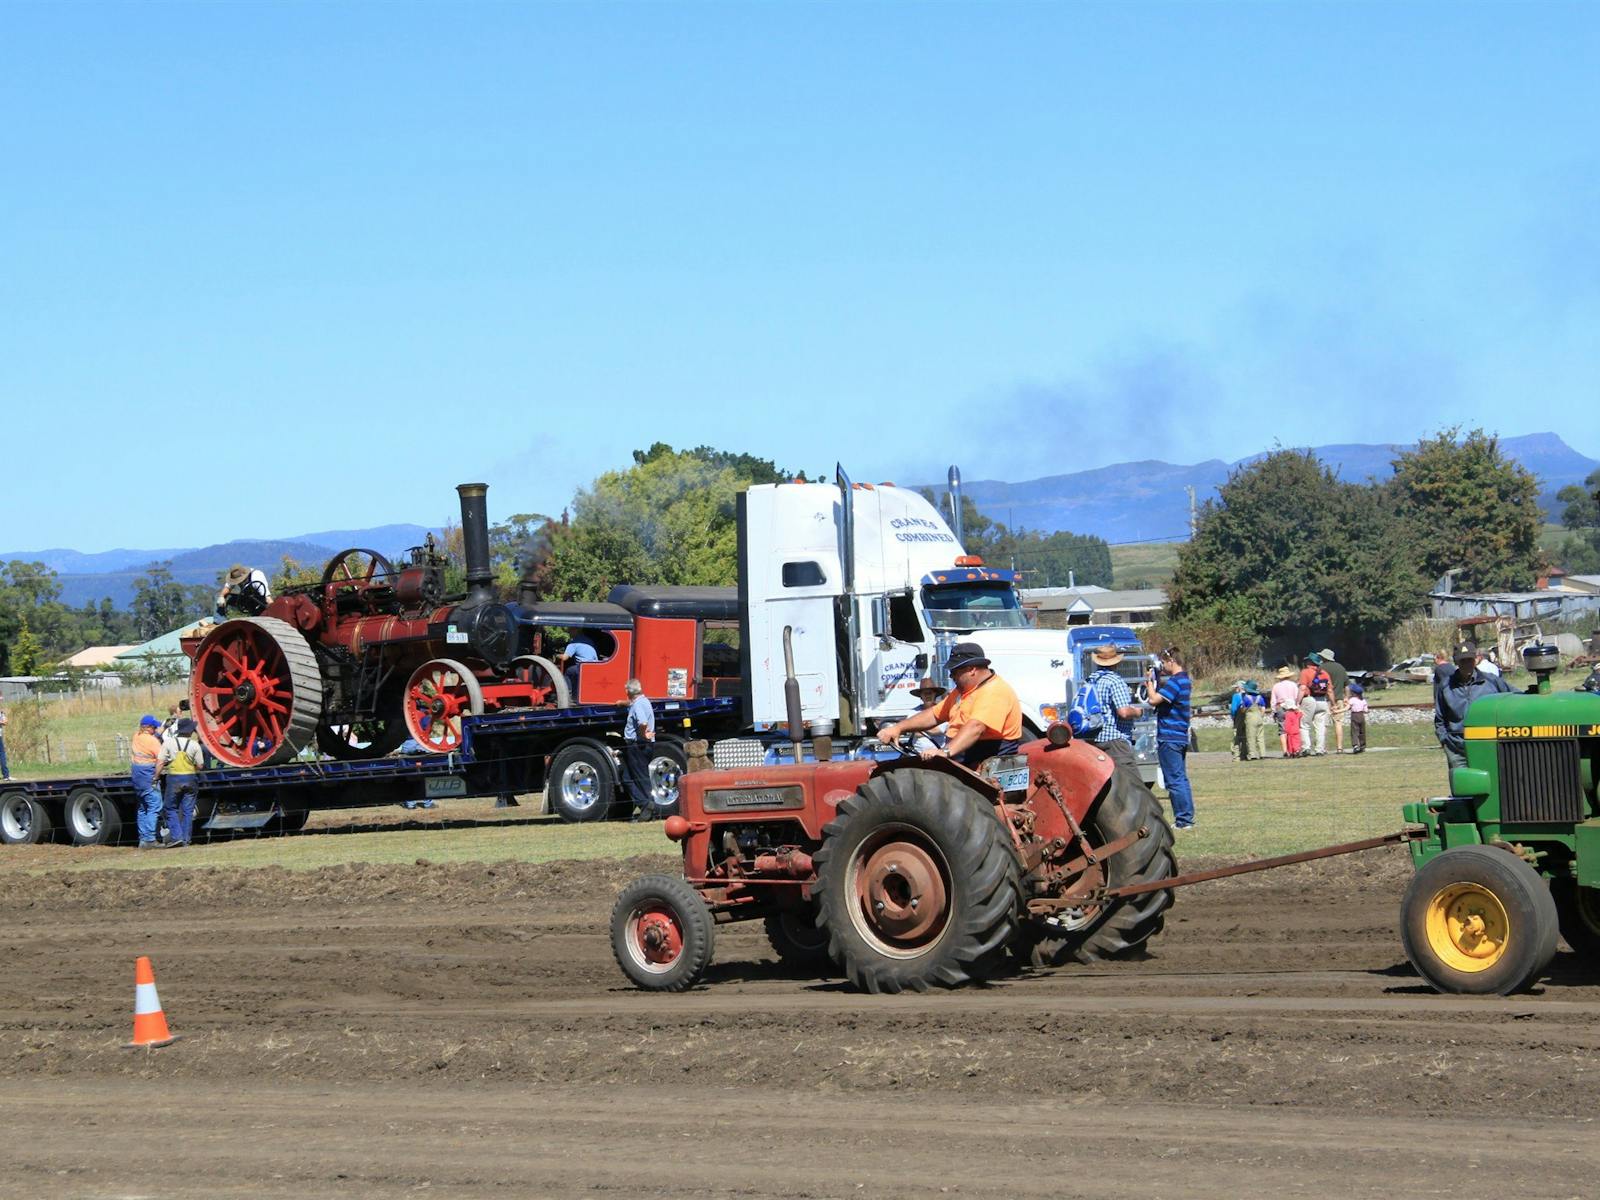 Tractor Pulling is very popular